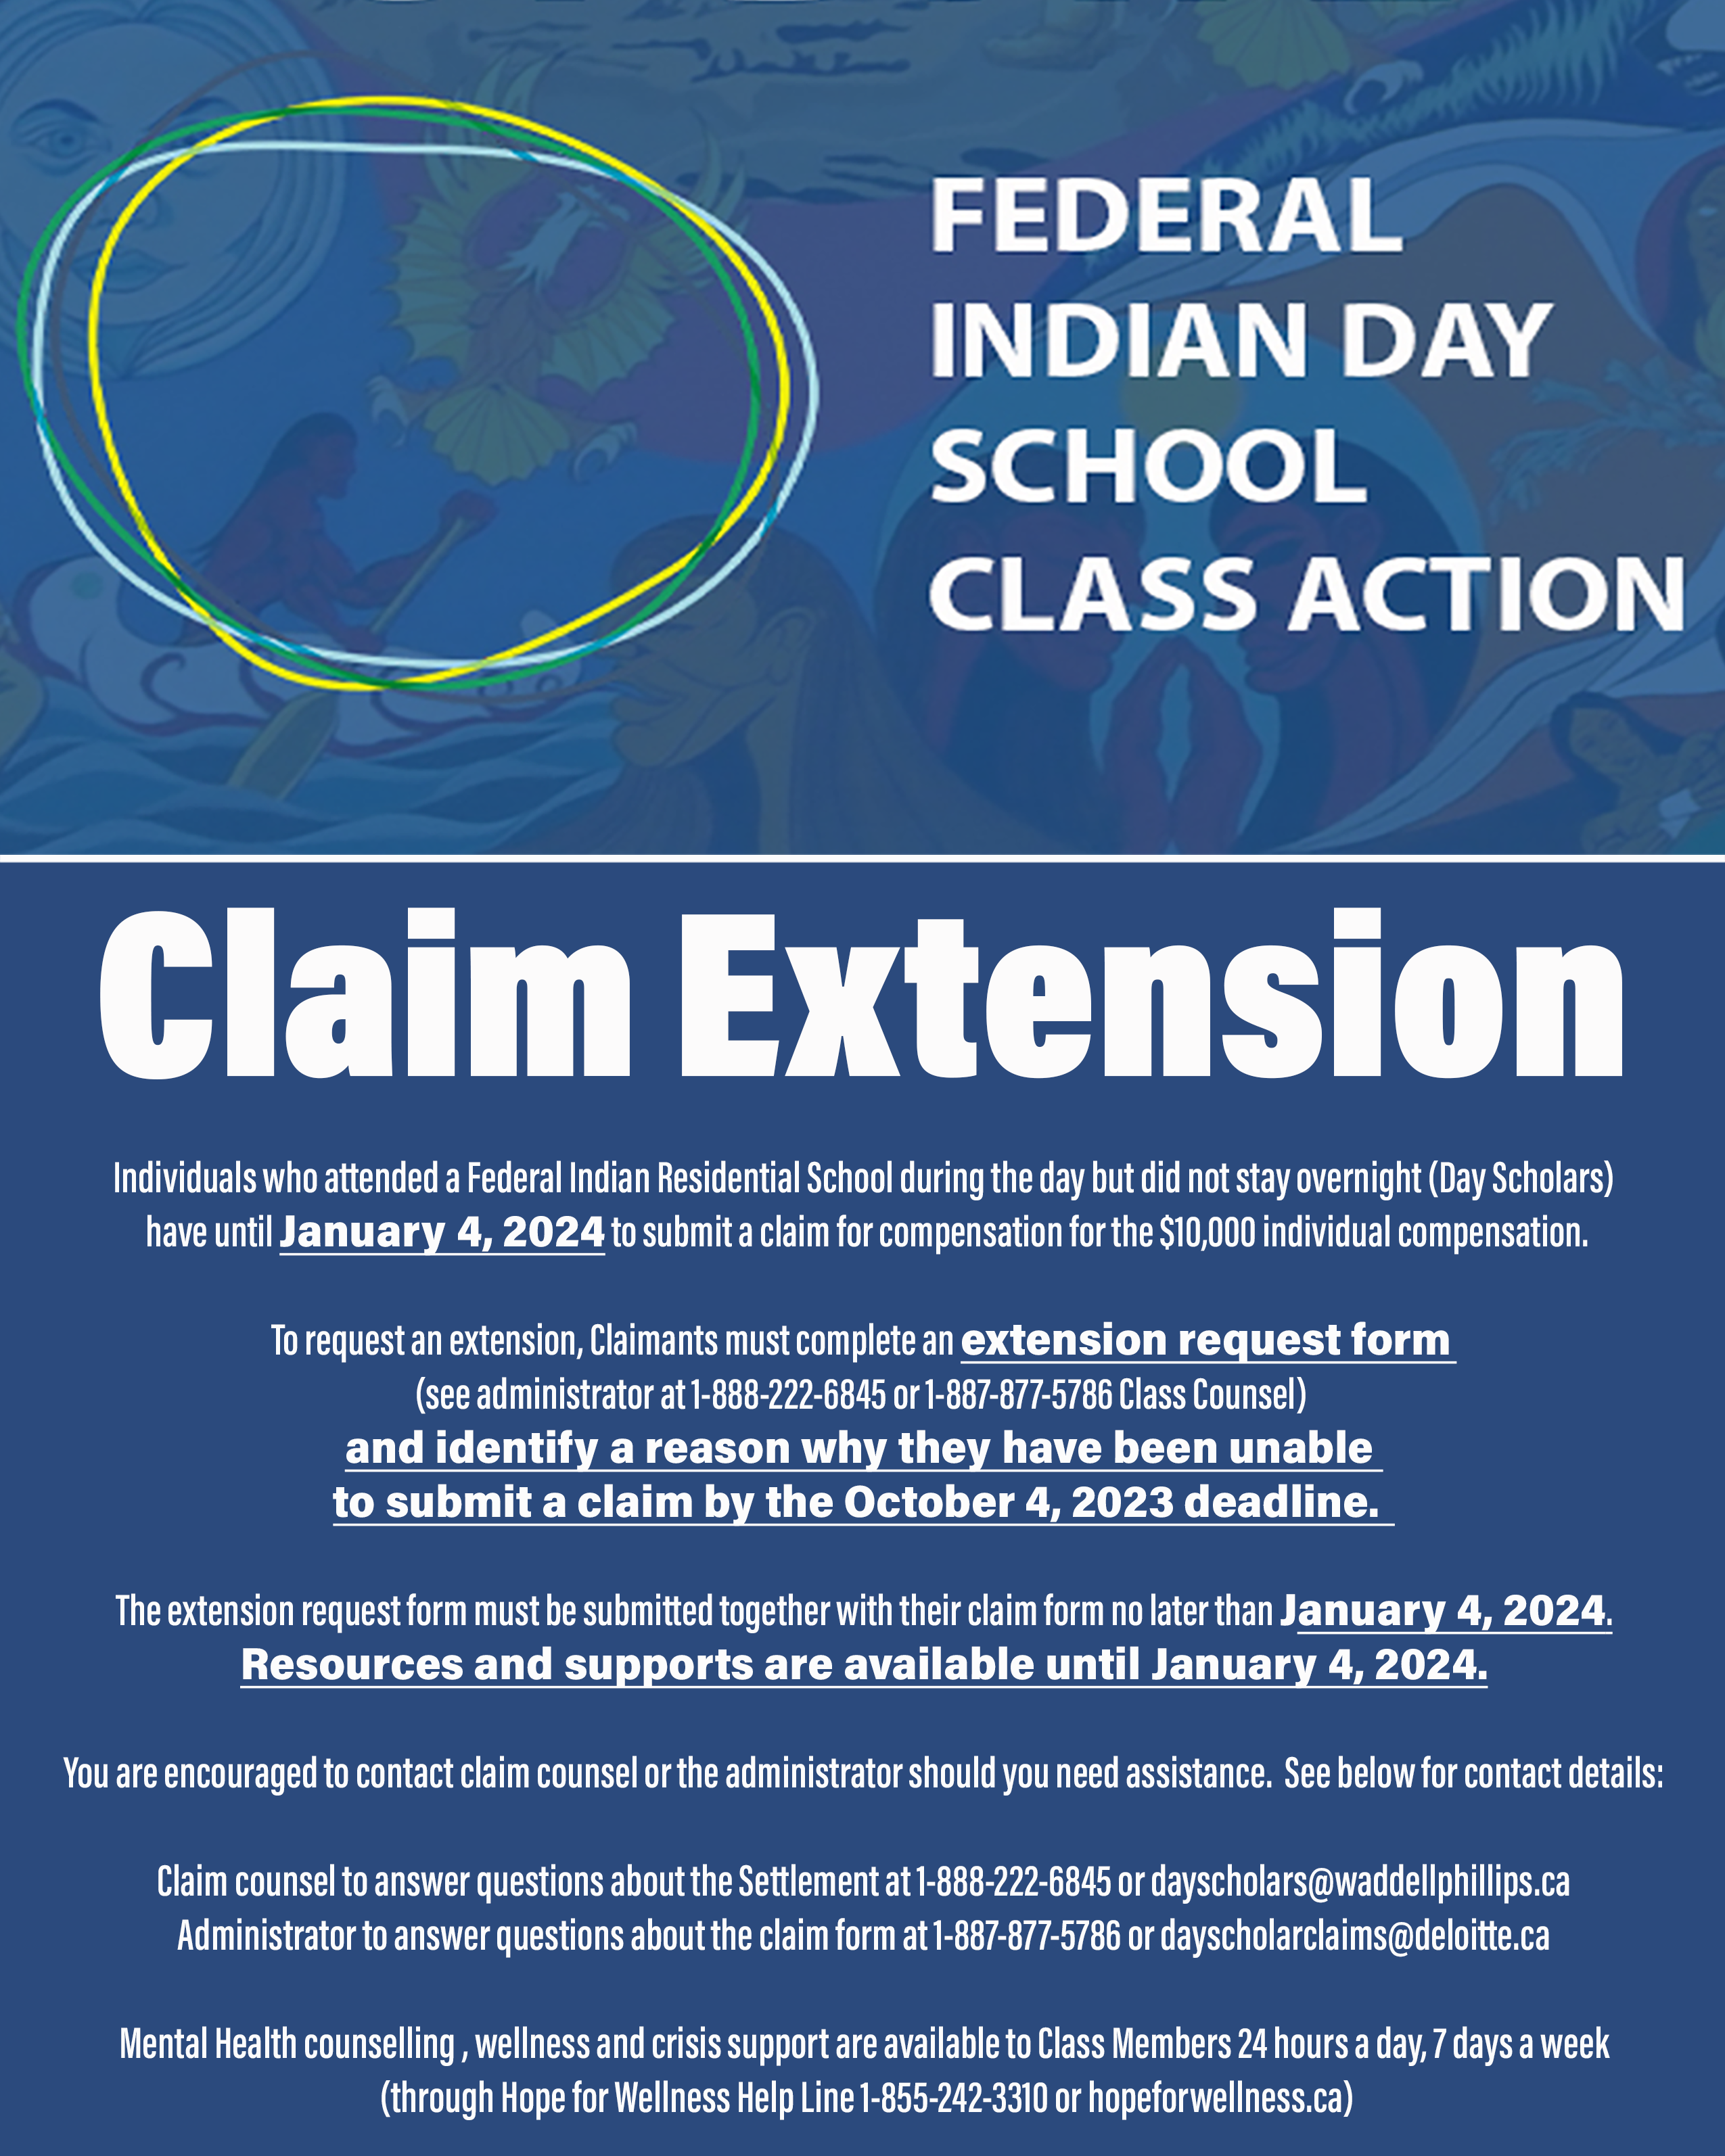 Federal Indian Day School claim period extension